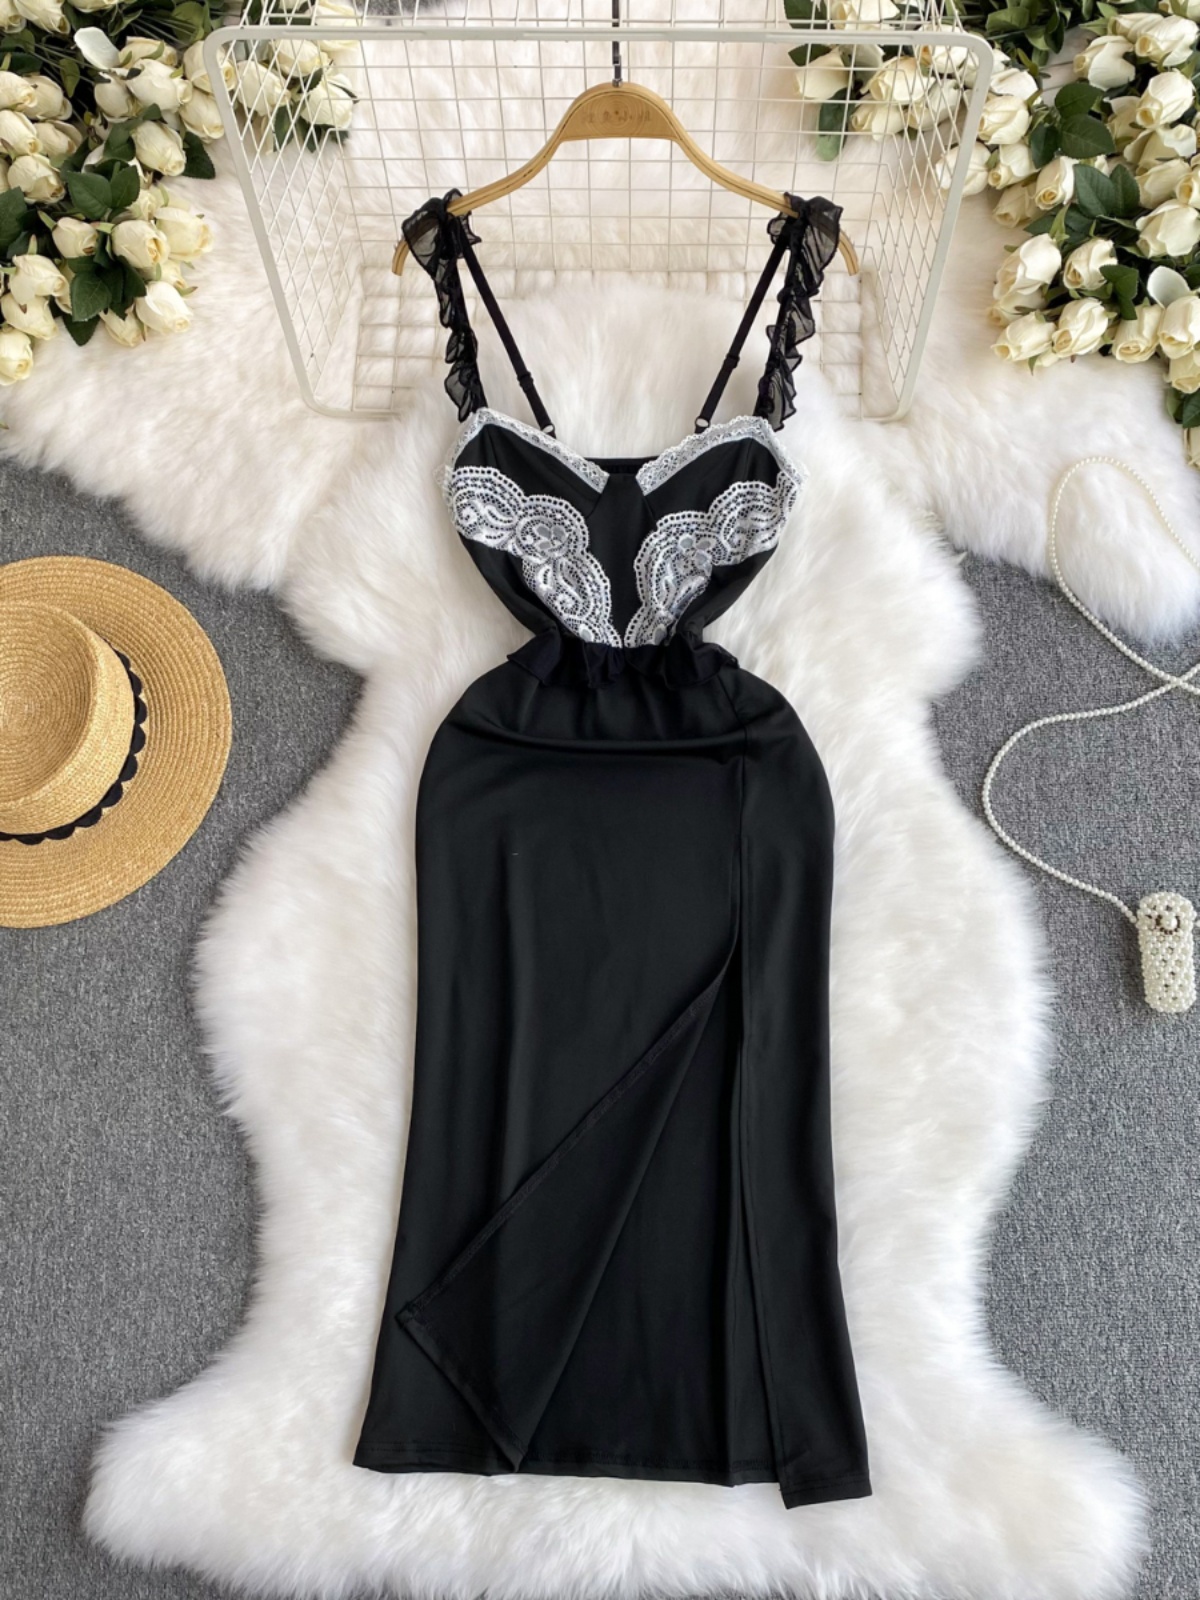 Fashionable and luxurious style, with a camisole dress for women. Summer wood ear slit design, niche, pure desire, spicy girl long dress